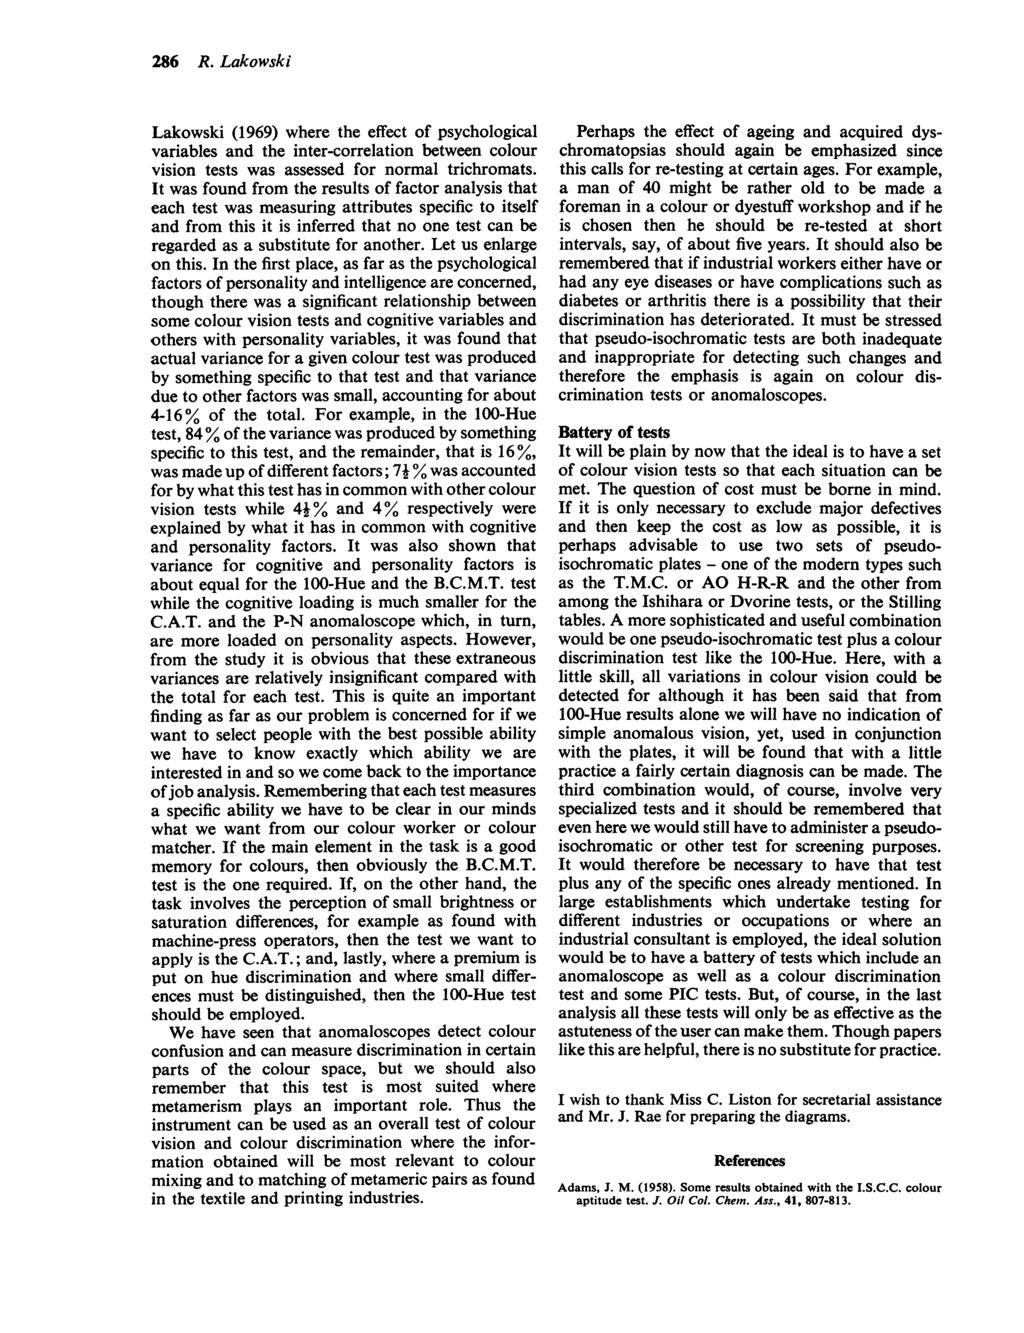 286 R. Lakowski Lakowski (1969) where the effect of psychological variables and the inter-correlation between colour vision tests was assessed for normal trichromats.